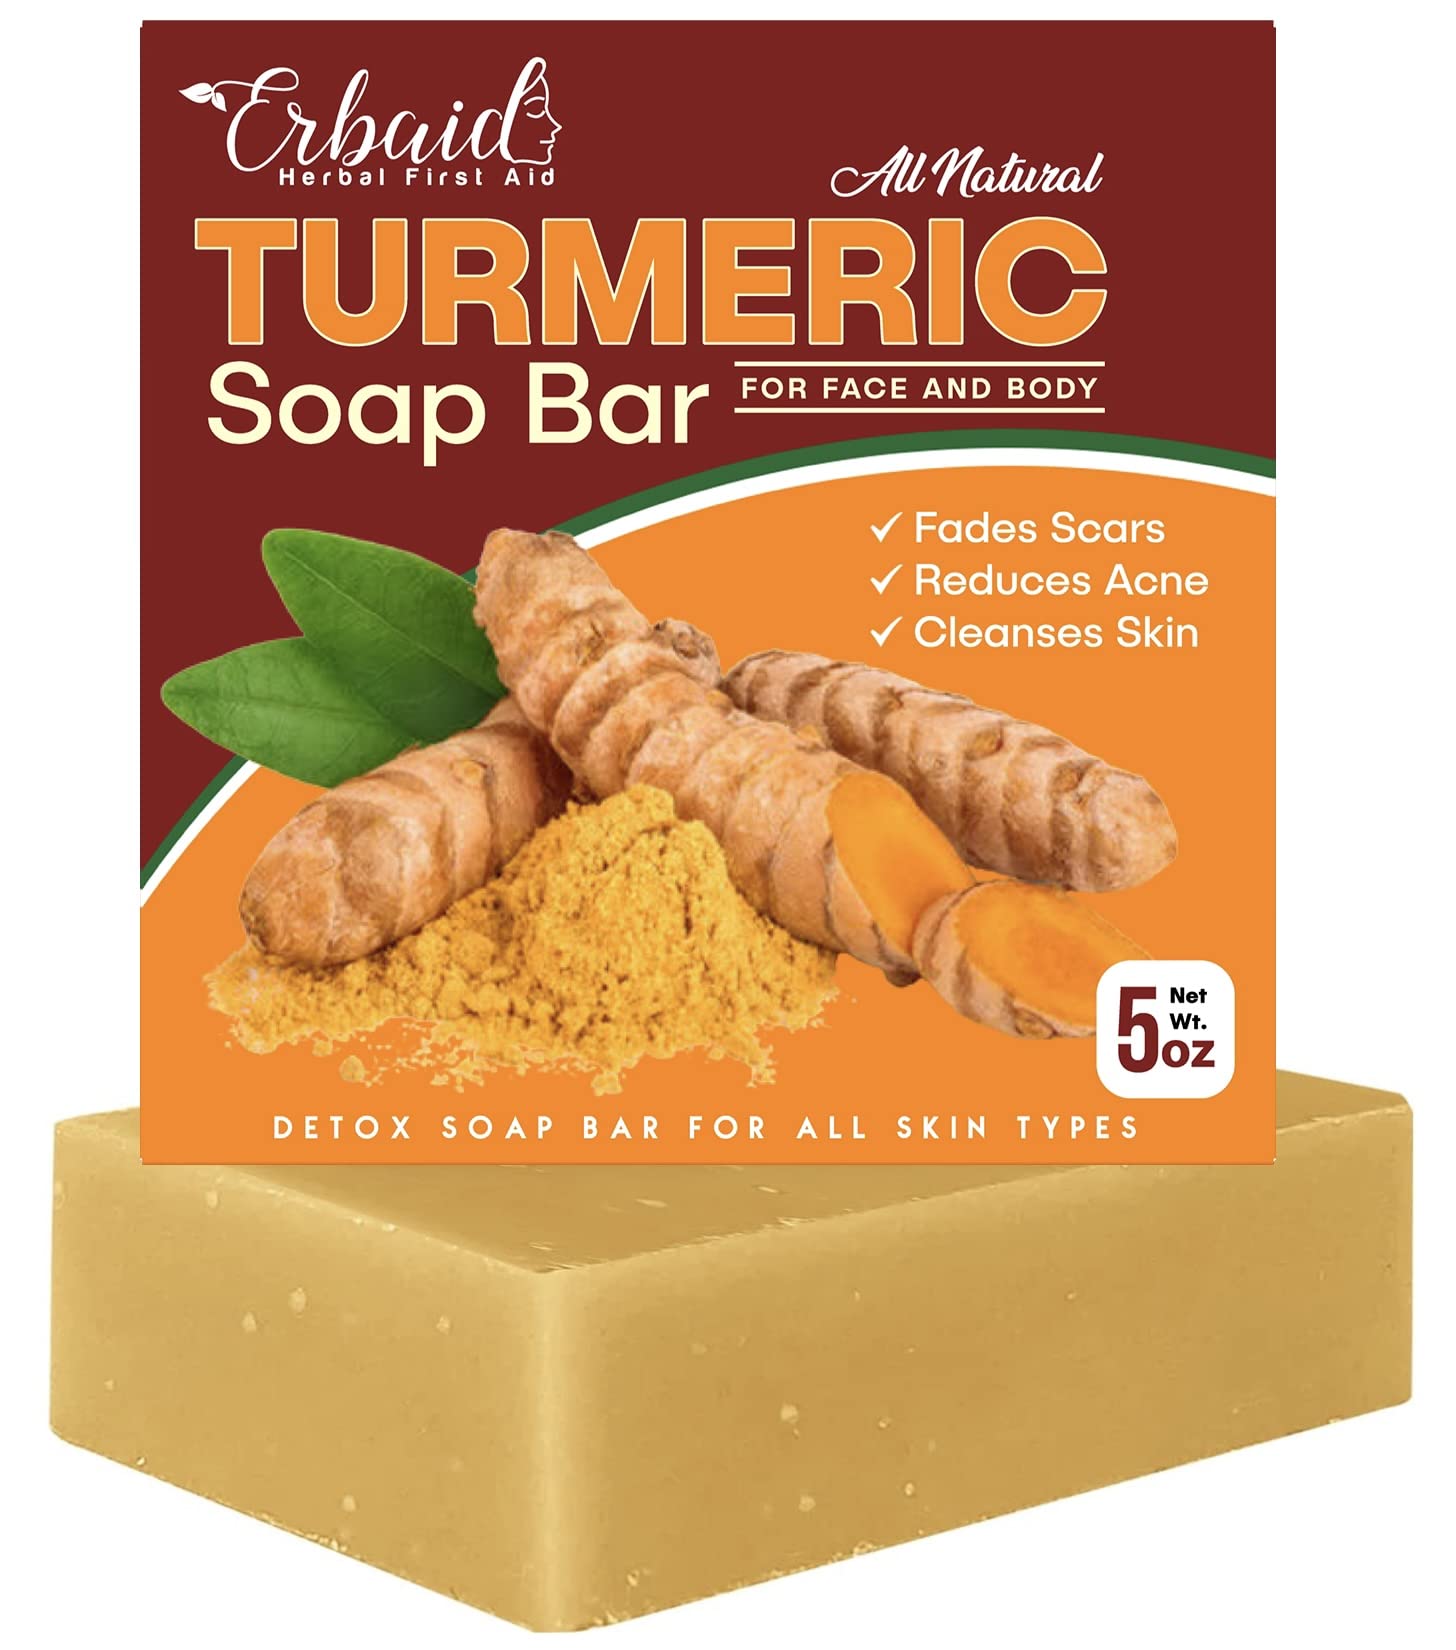 Natural Turmeric Soap Bar for Face & Body – Turmeric Skin Brightening Soap for Dark Spots, Intimate Areas, Underarms – Turmeric Face Wash Reduces Acne, Fades Scars & Cleanses Skin – 5oz Turmeric Bar Soap for All Skin Types Made in USA (5 Ounce (Pack of 1)